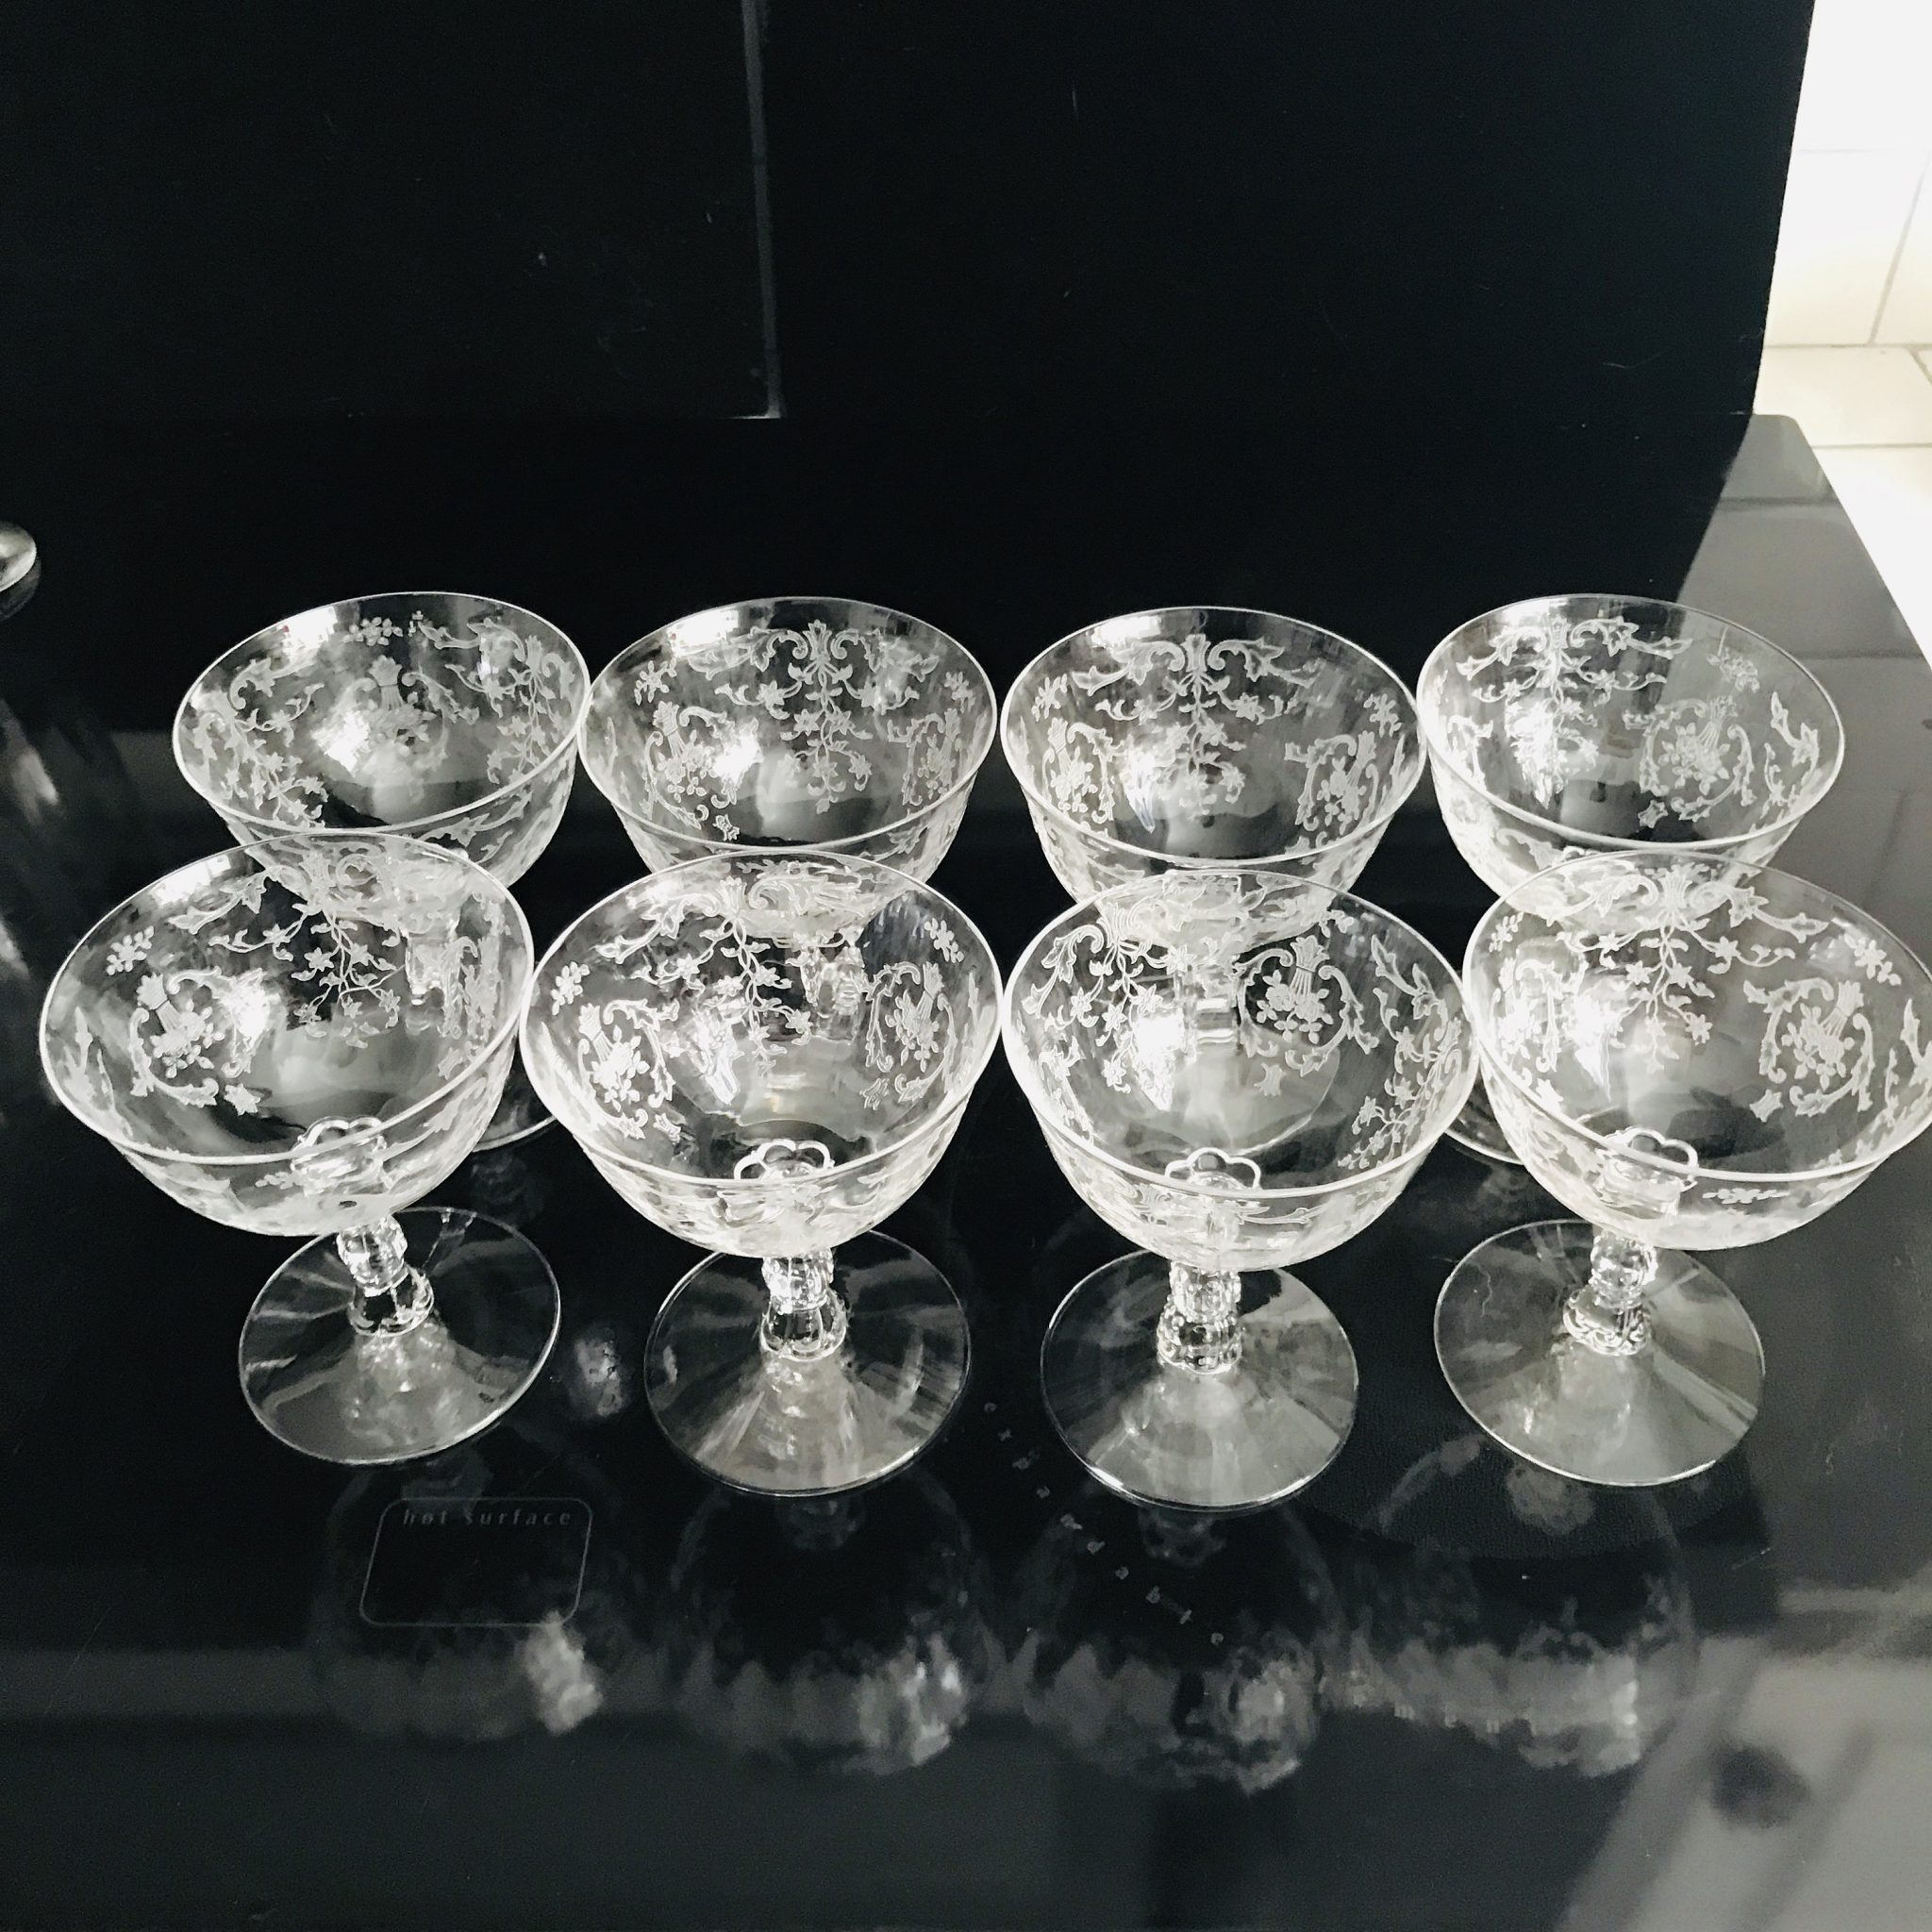 Vintage 8 Claret Wine Glasses Or Shallow Champagne Fostoria Crystal Navarre Pattern Paneled And